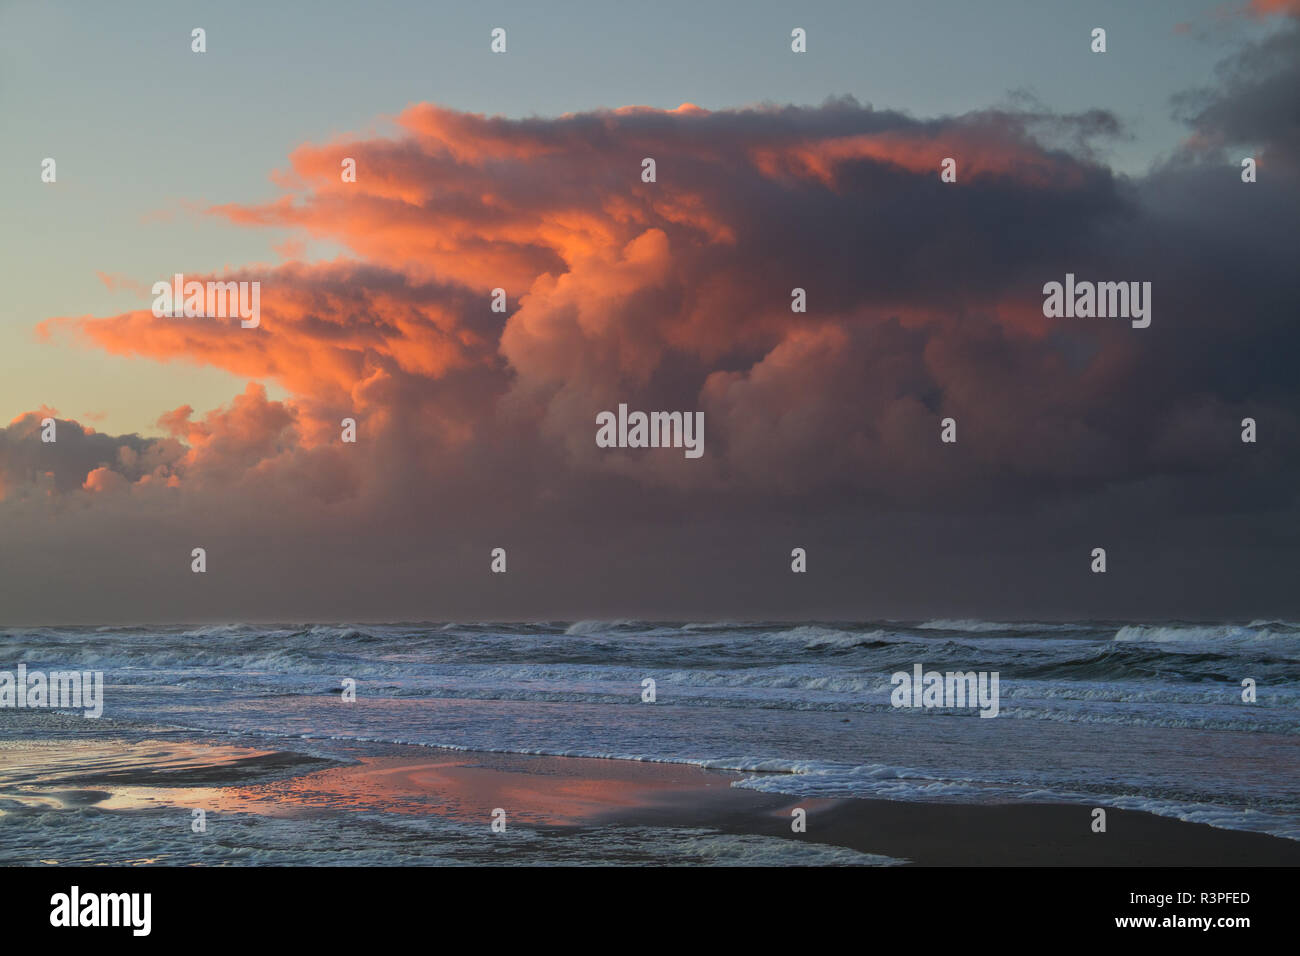 Storm front approaching over the sea after sunset: threatening red clouds above the dark water Stock Photo